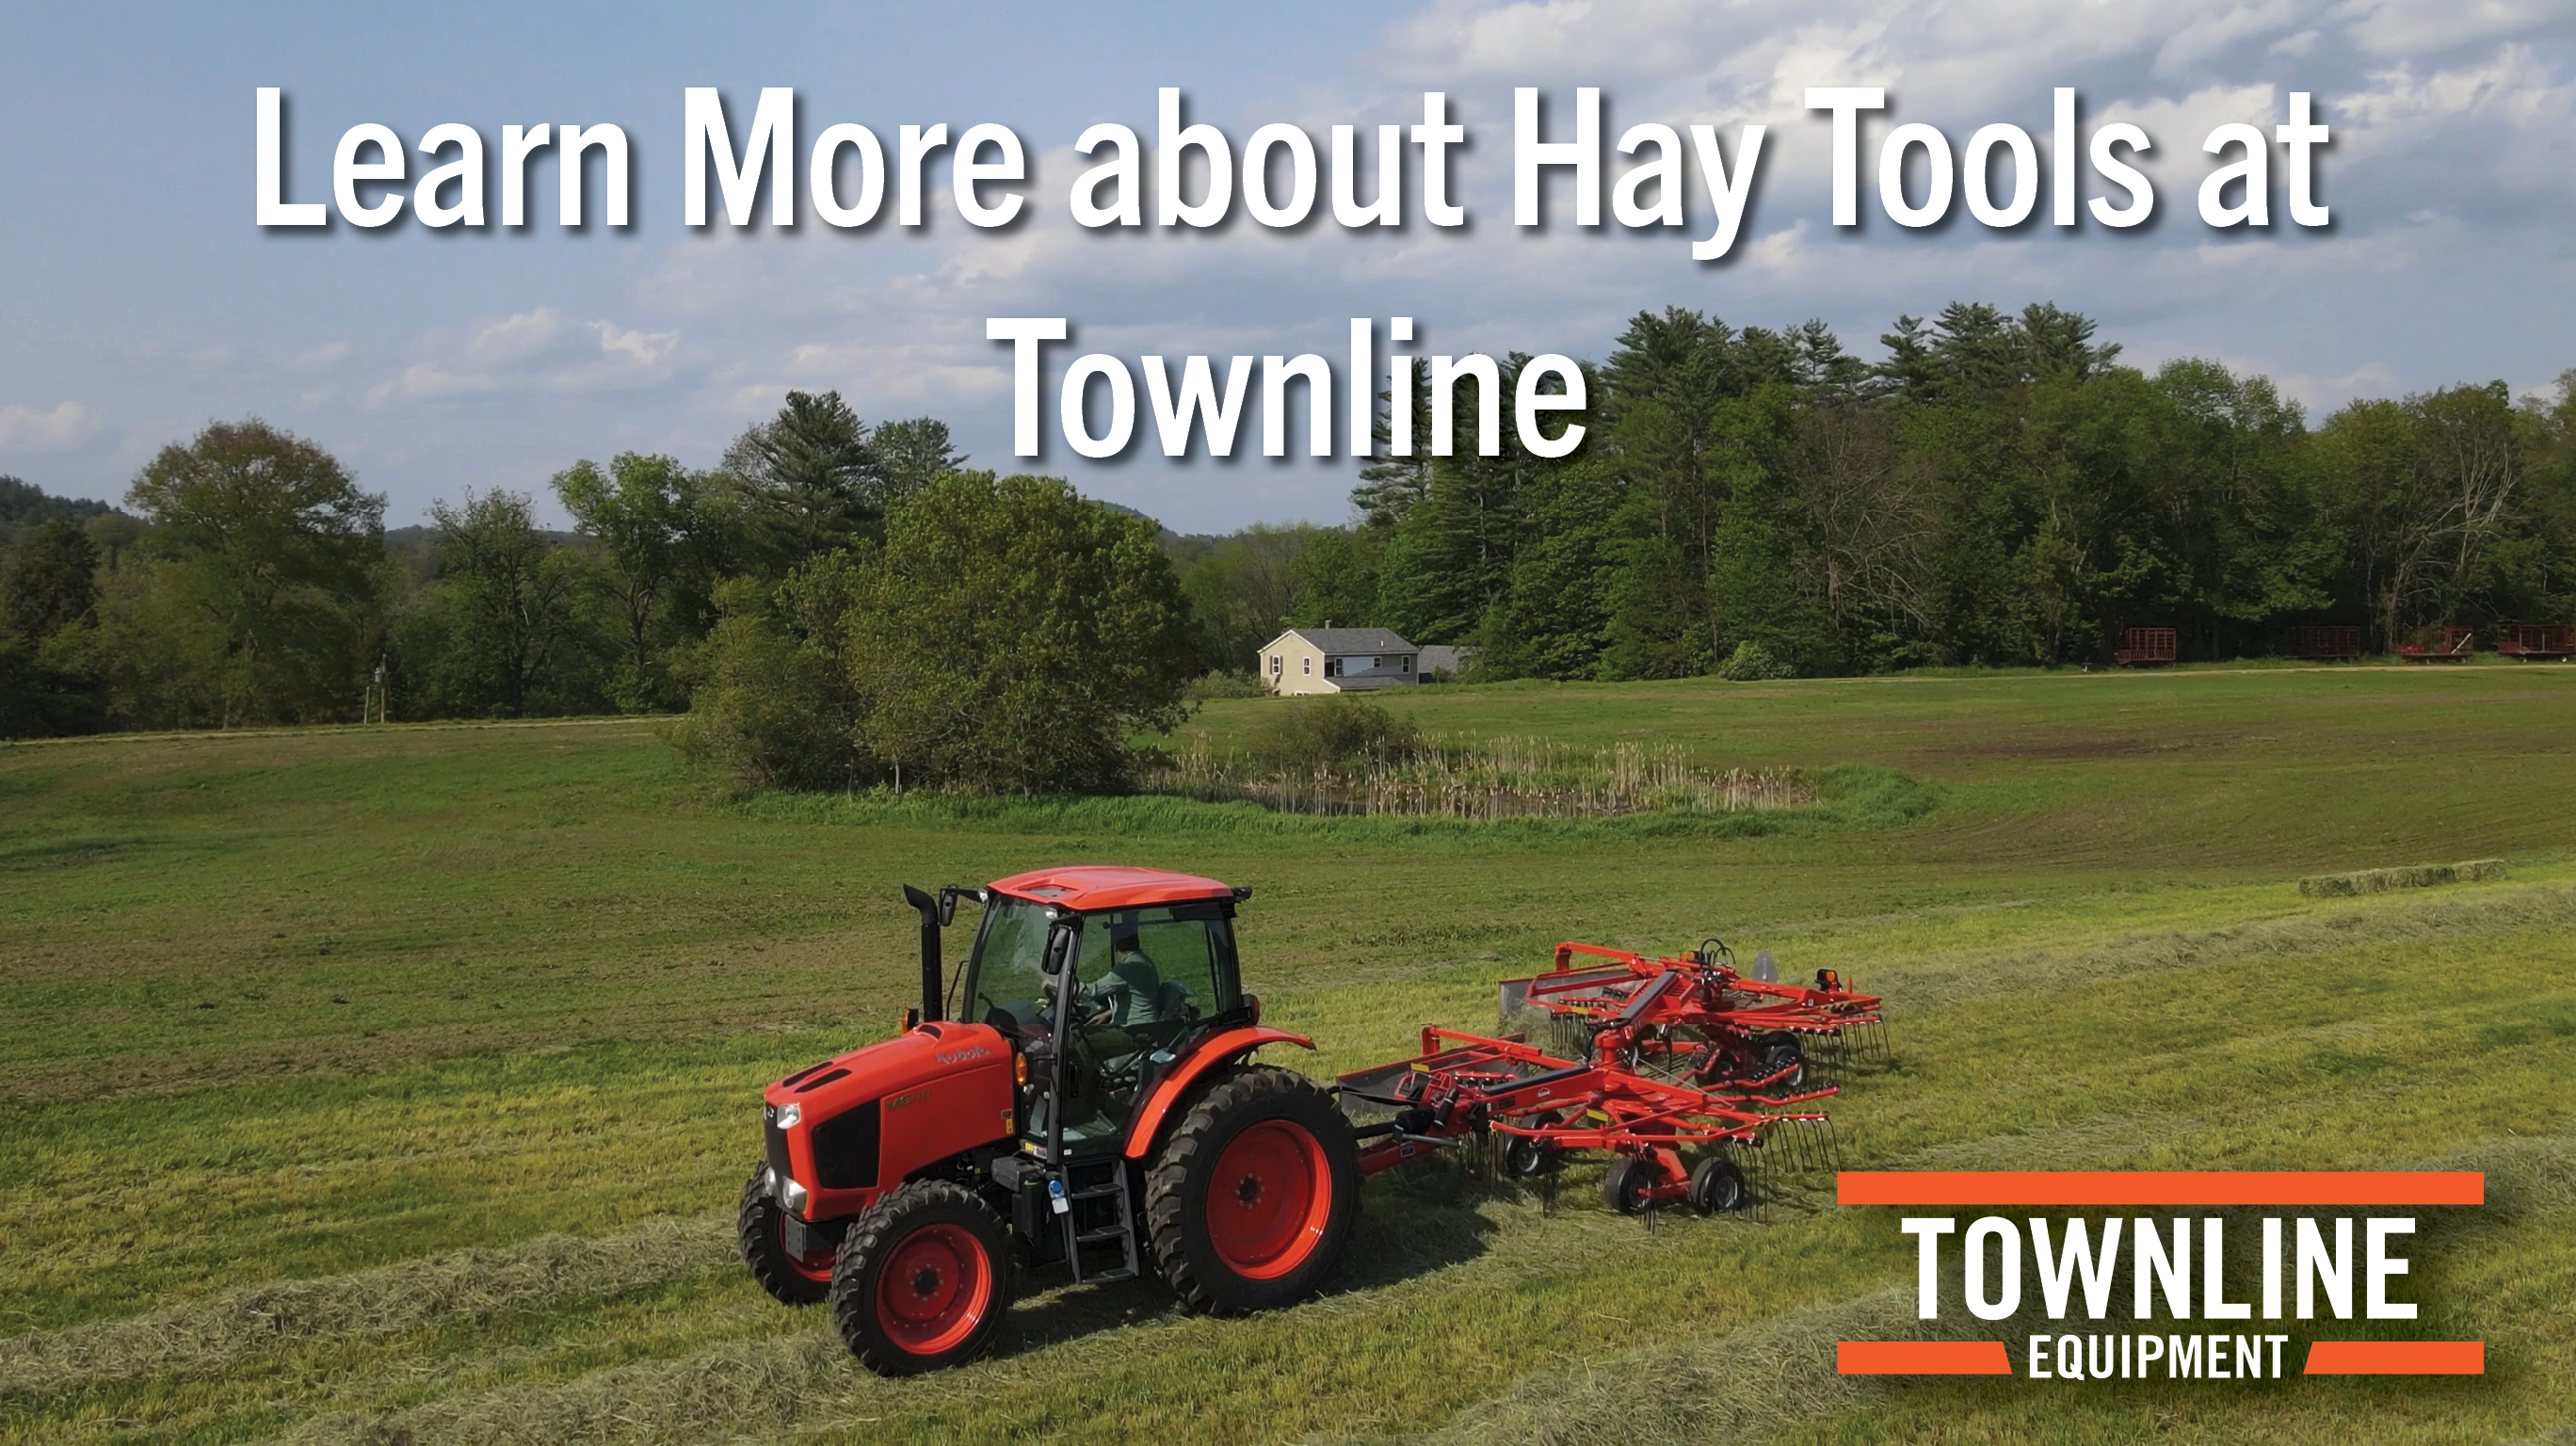 Hay Equipment Townline has to offer